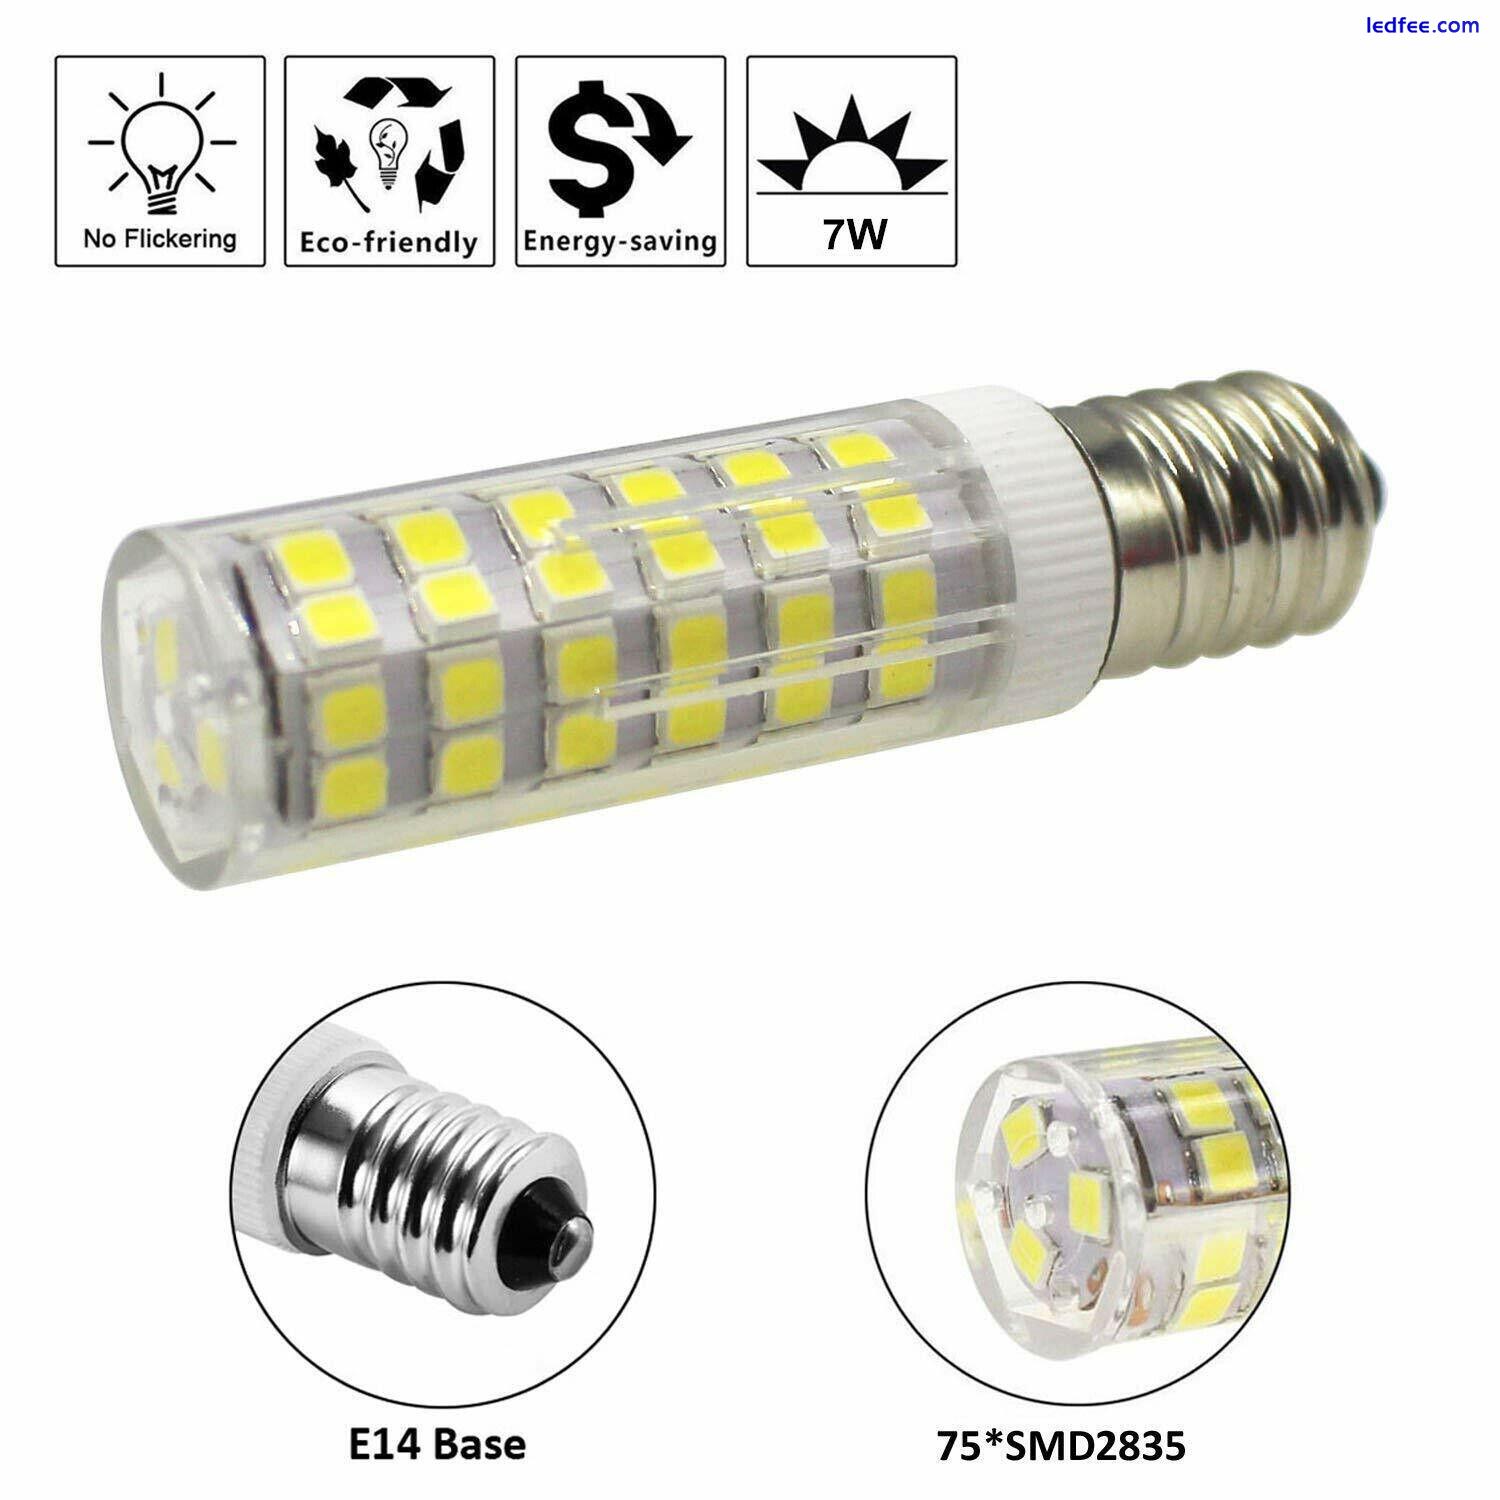 The Best E14 3W, 5W or 7W LED bulbs, Ideal for replacing your halogen bulbs. 5 